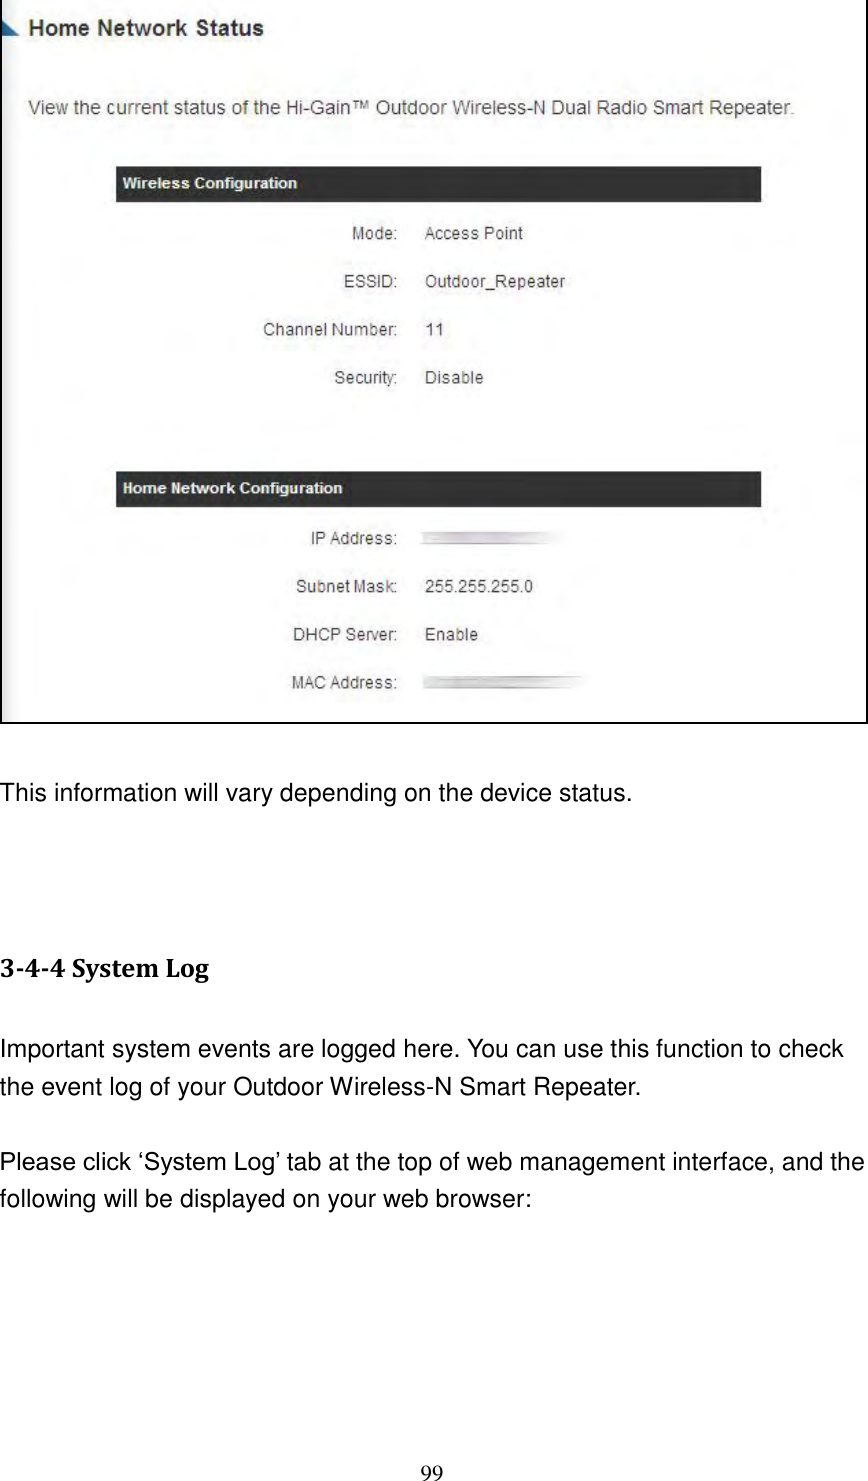 99   This information will vary depending on the device status.    3-4-4 System Log  Important system events are logged here. You can use this function to check the event log of your Outdoor Wireless-N Smart Repeater.  Please click „System Log‟ tab at the top of web management interface, and the following will be displayed on your web browser:  